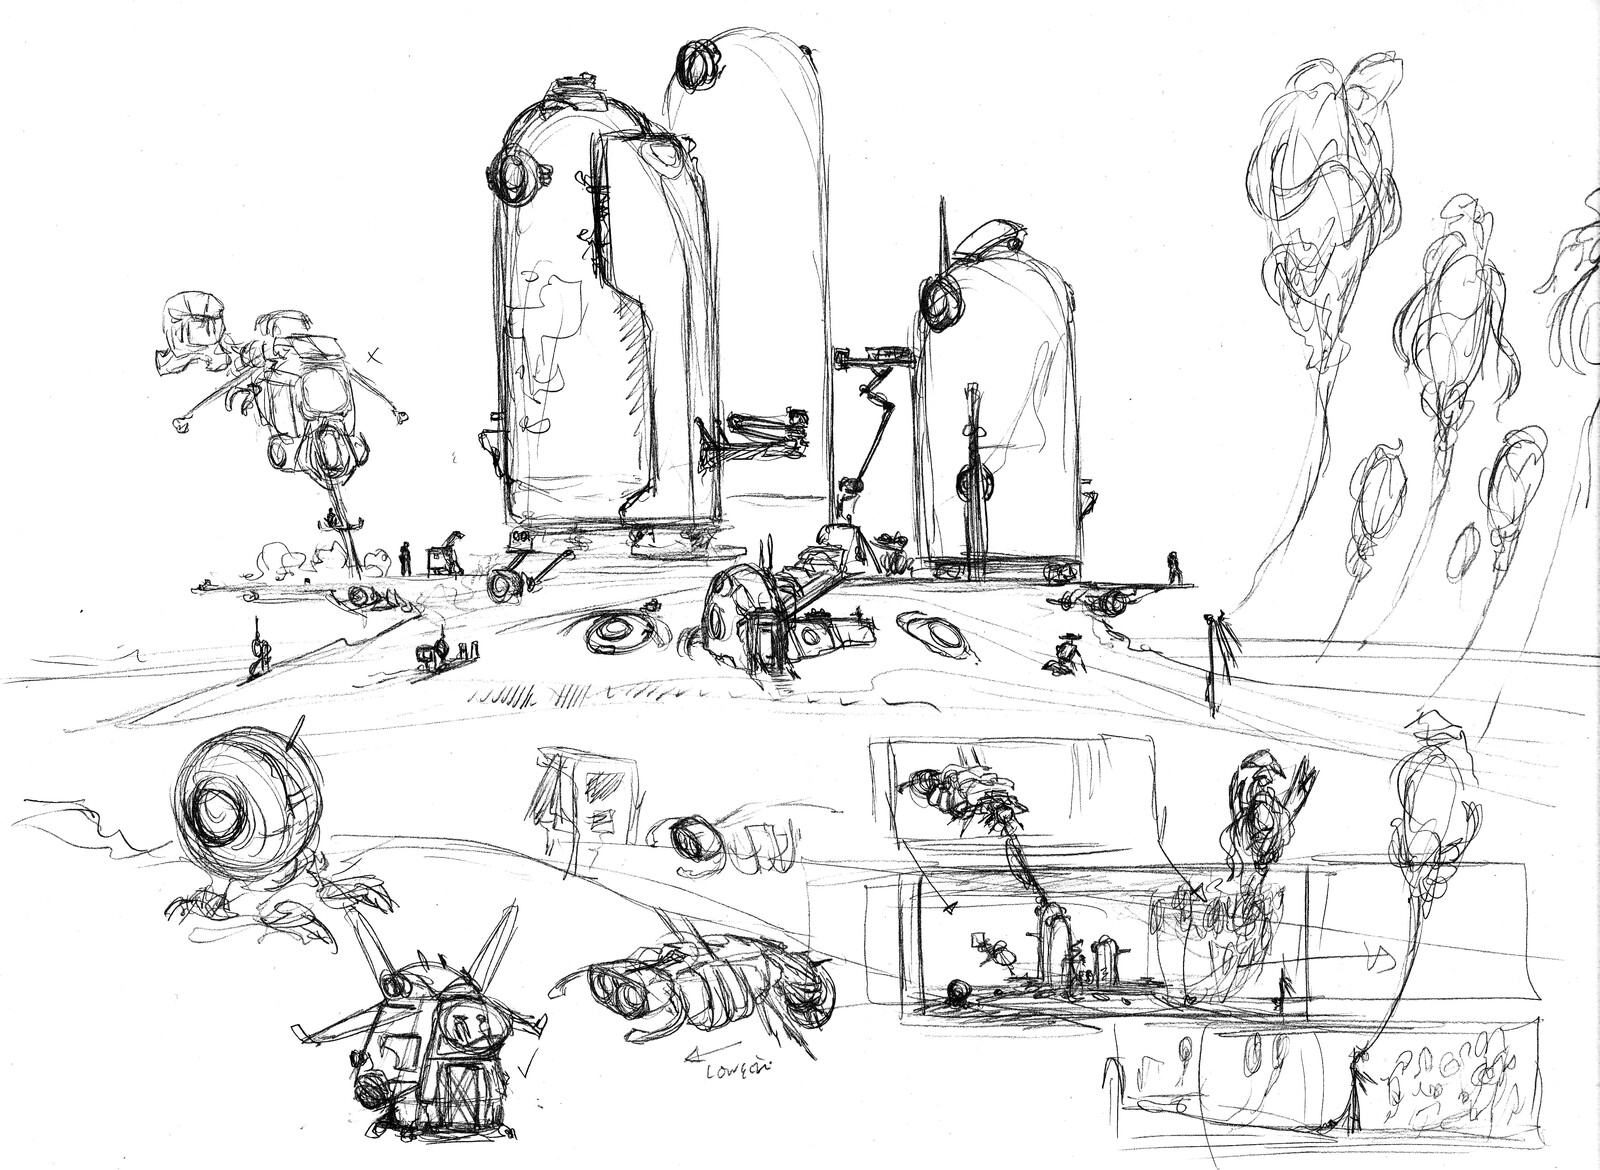 A very early pencil concept looking at the facility planetside and some "storyboarding" of a shot exploring this scene.